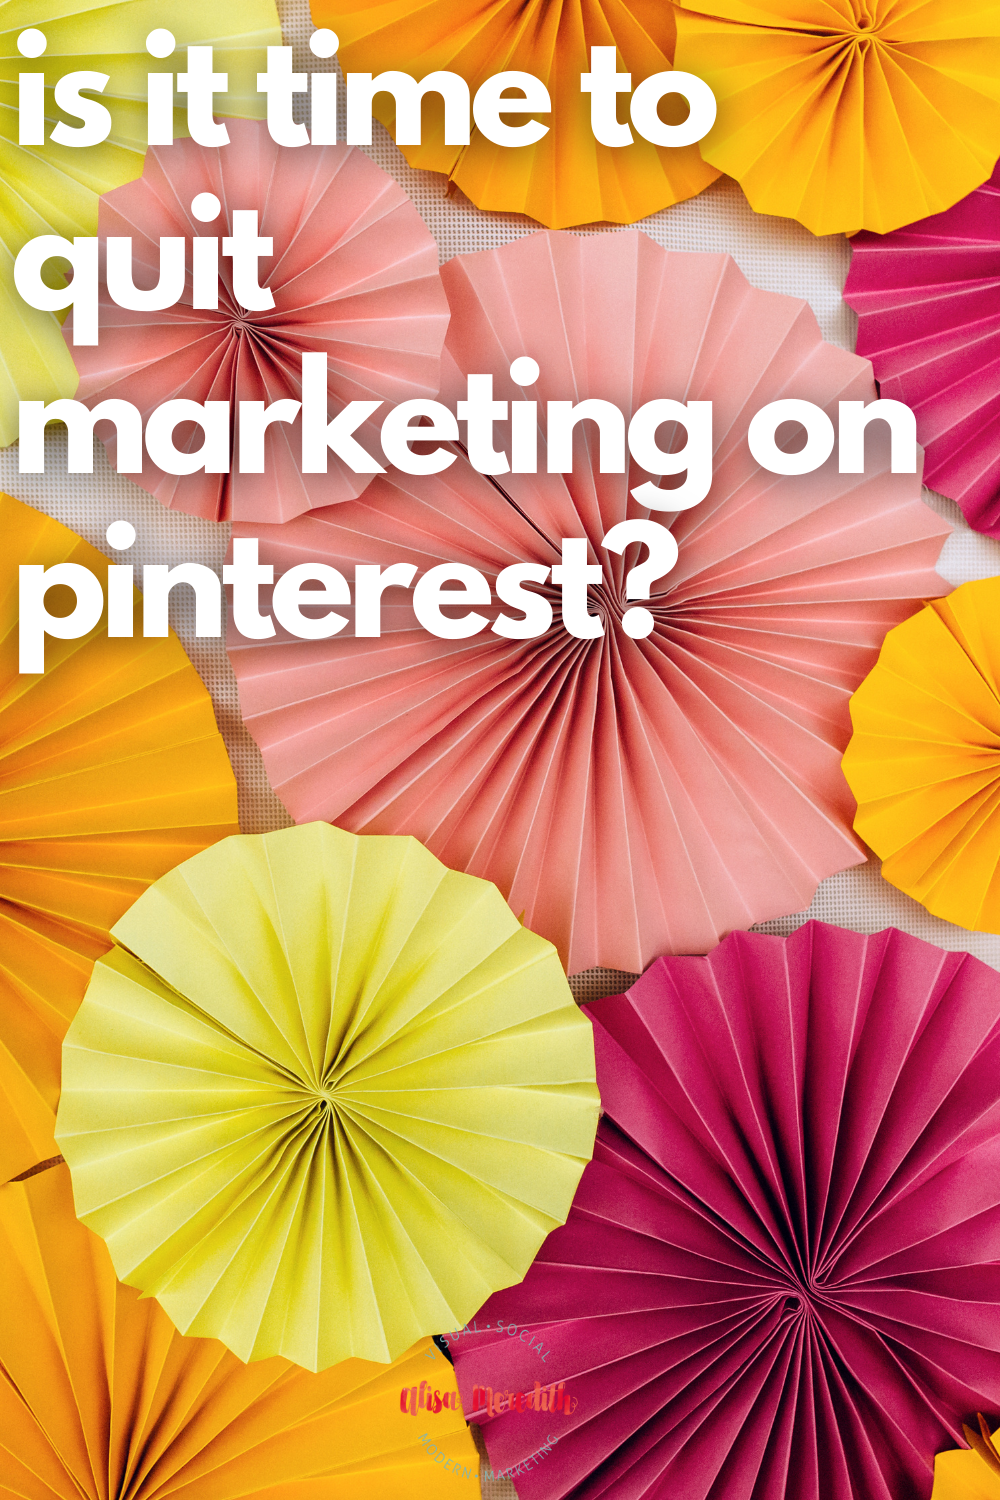 is it time to quit marketing on pinterest?